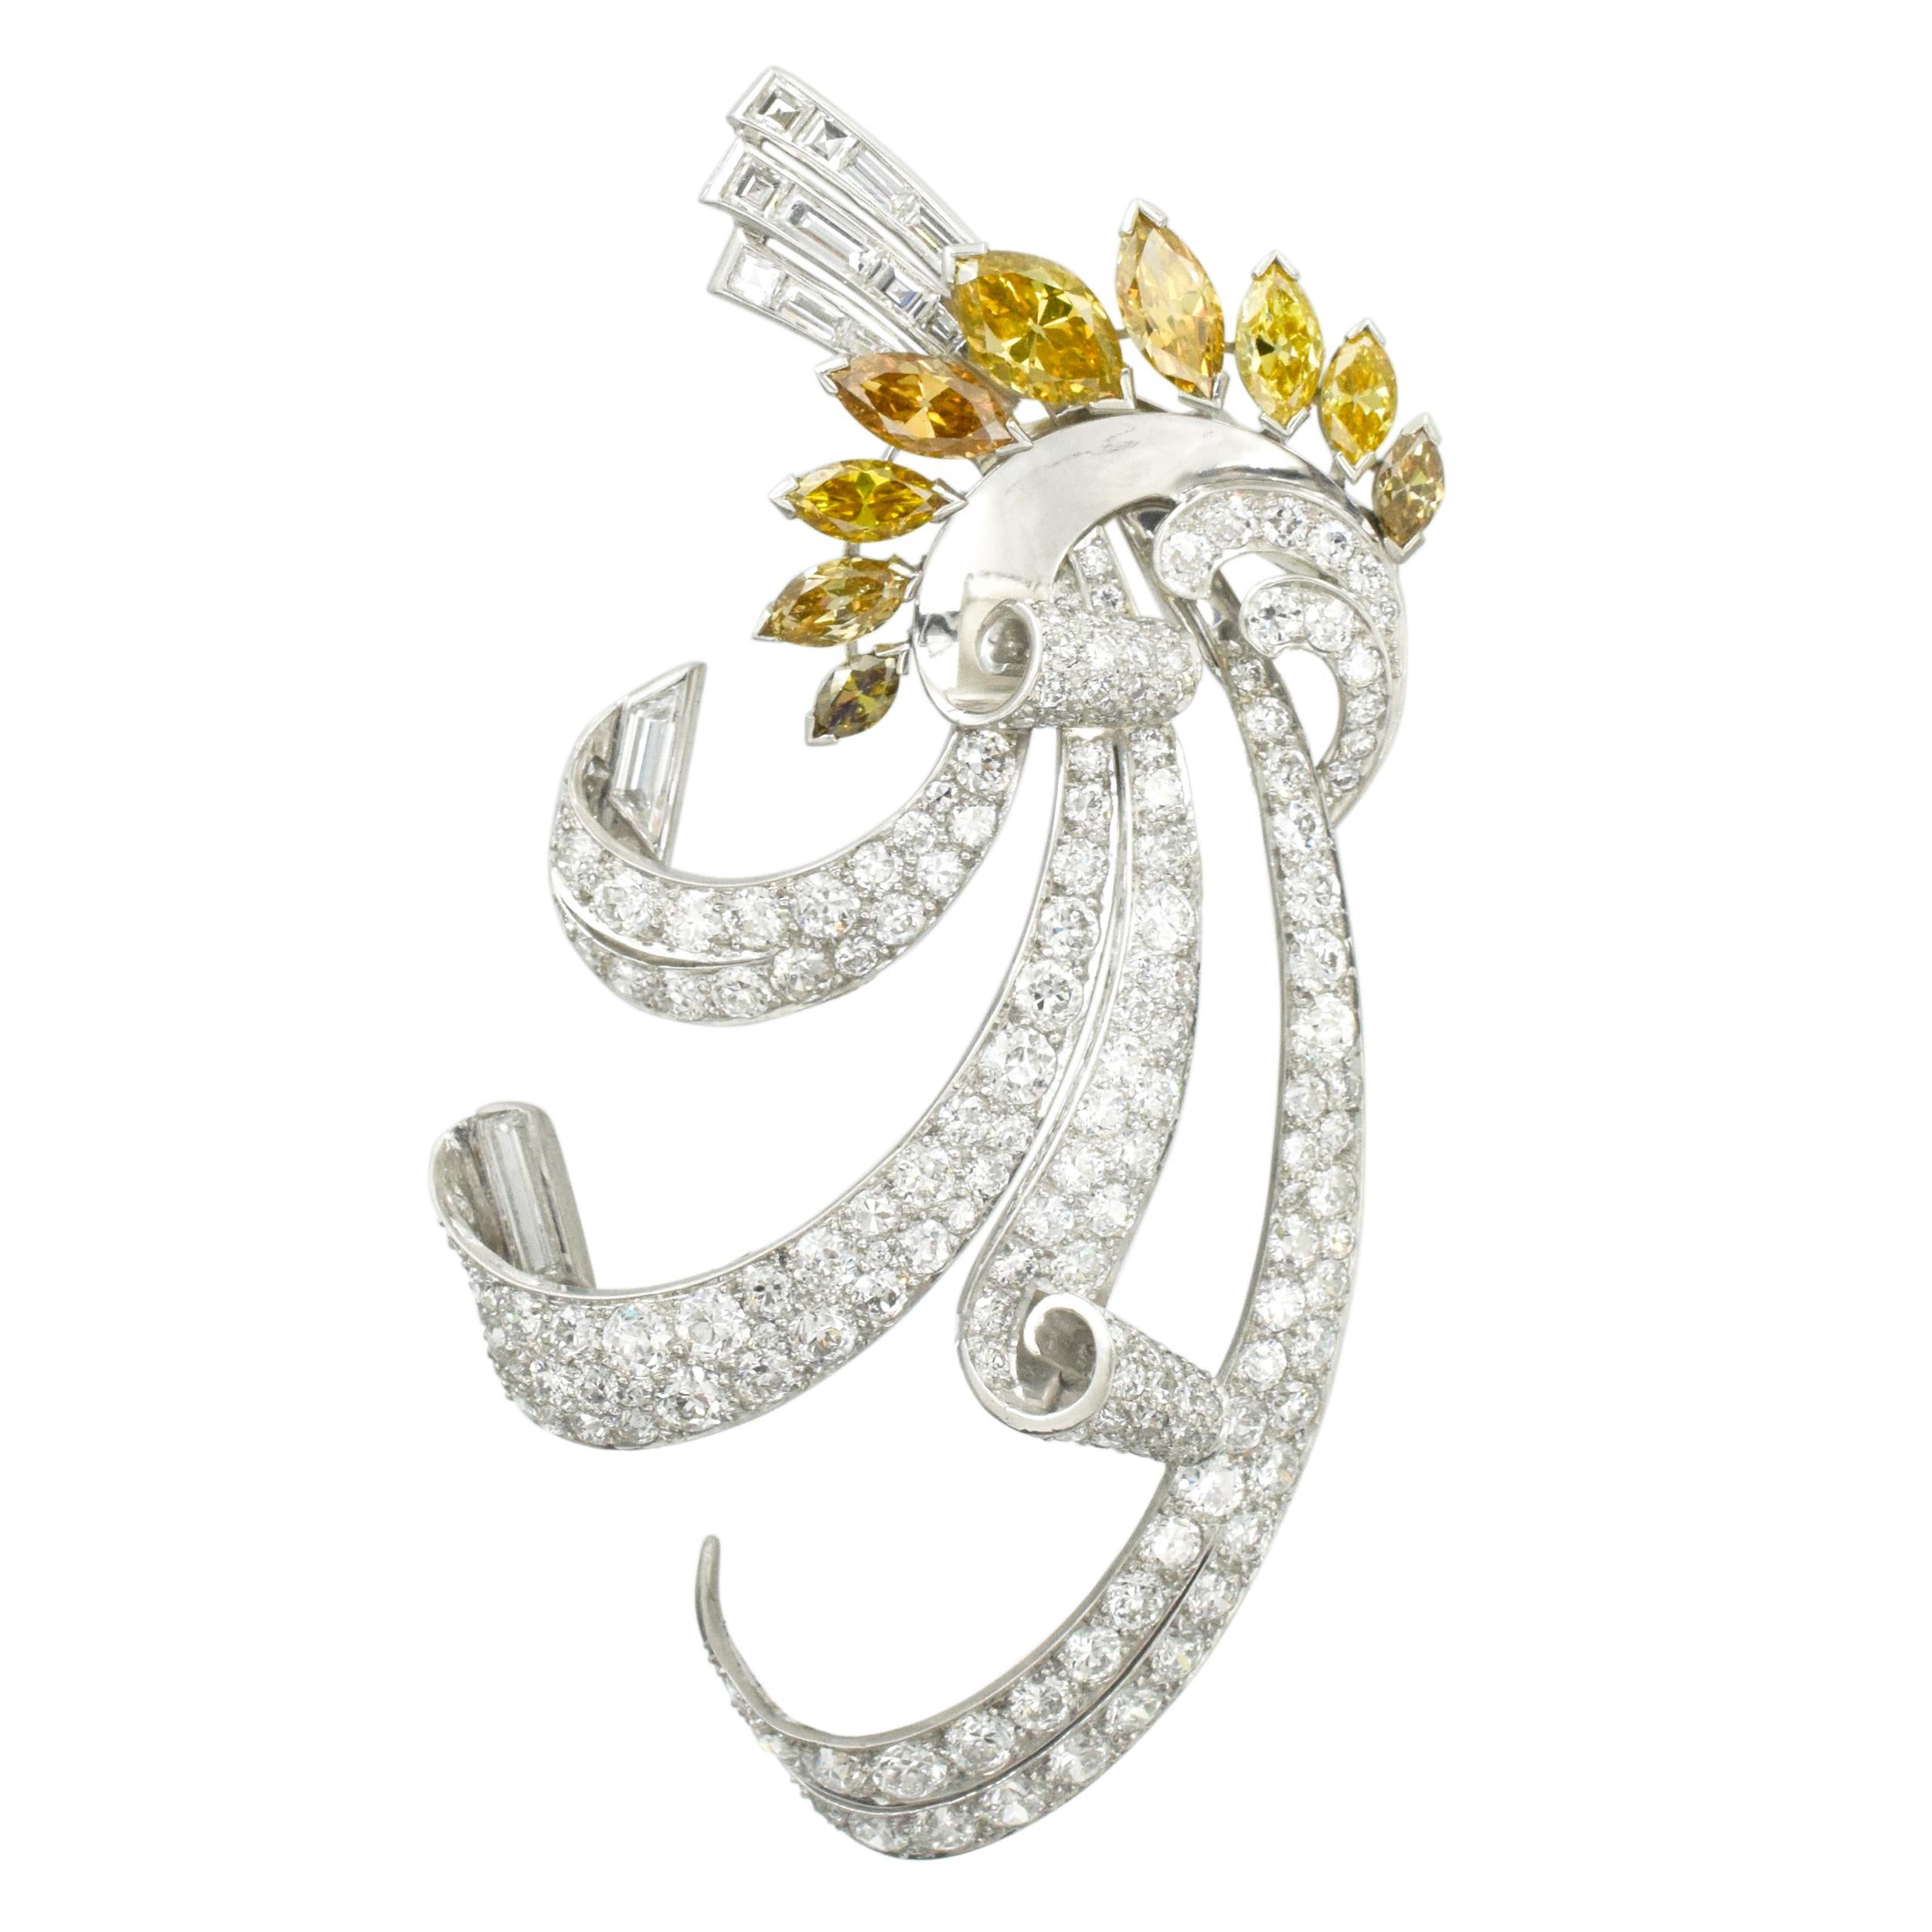 Circa 1940's.  Antique yellow and white diamond Diamond Clip-Brooch. This brooch features scrolled design
encrusted with total of approximately 9.55 carats of old Euro cut diamonds and old rectangular cut diamonds with total weight of approximately